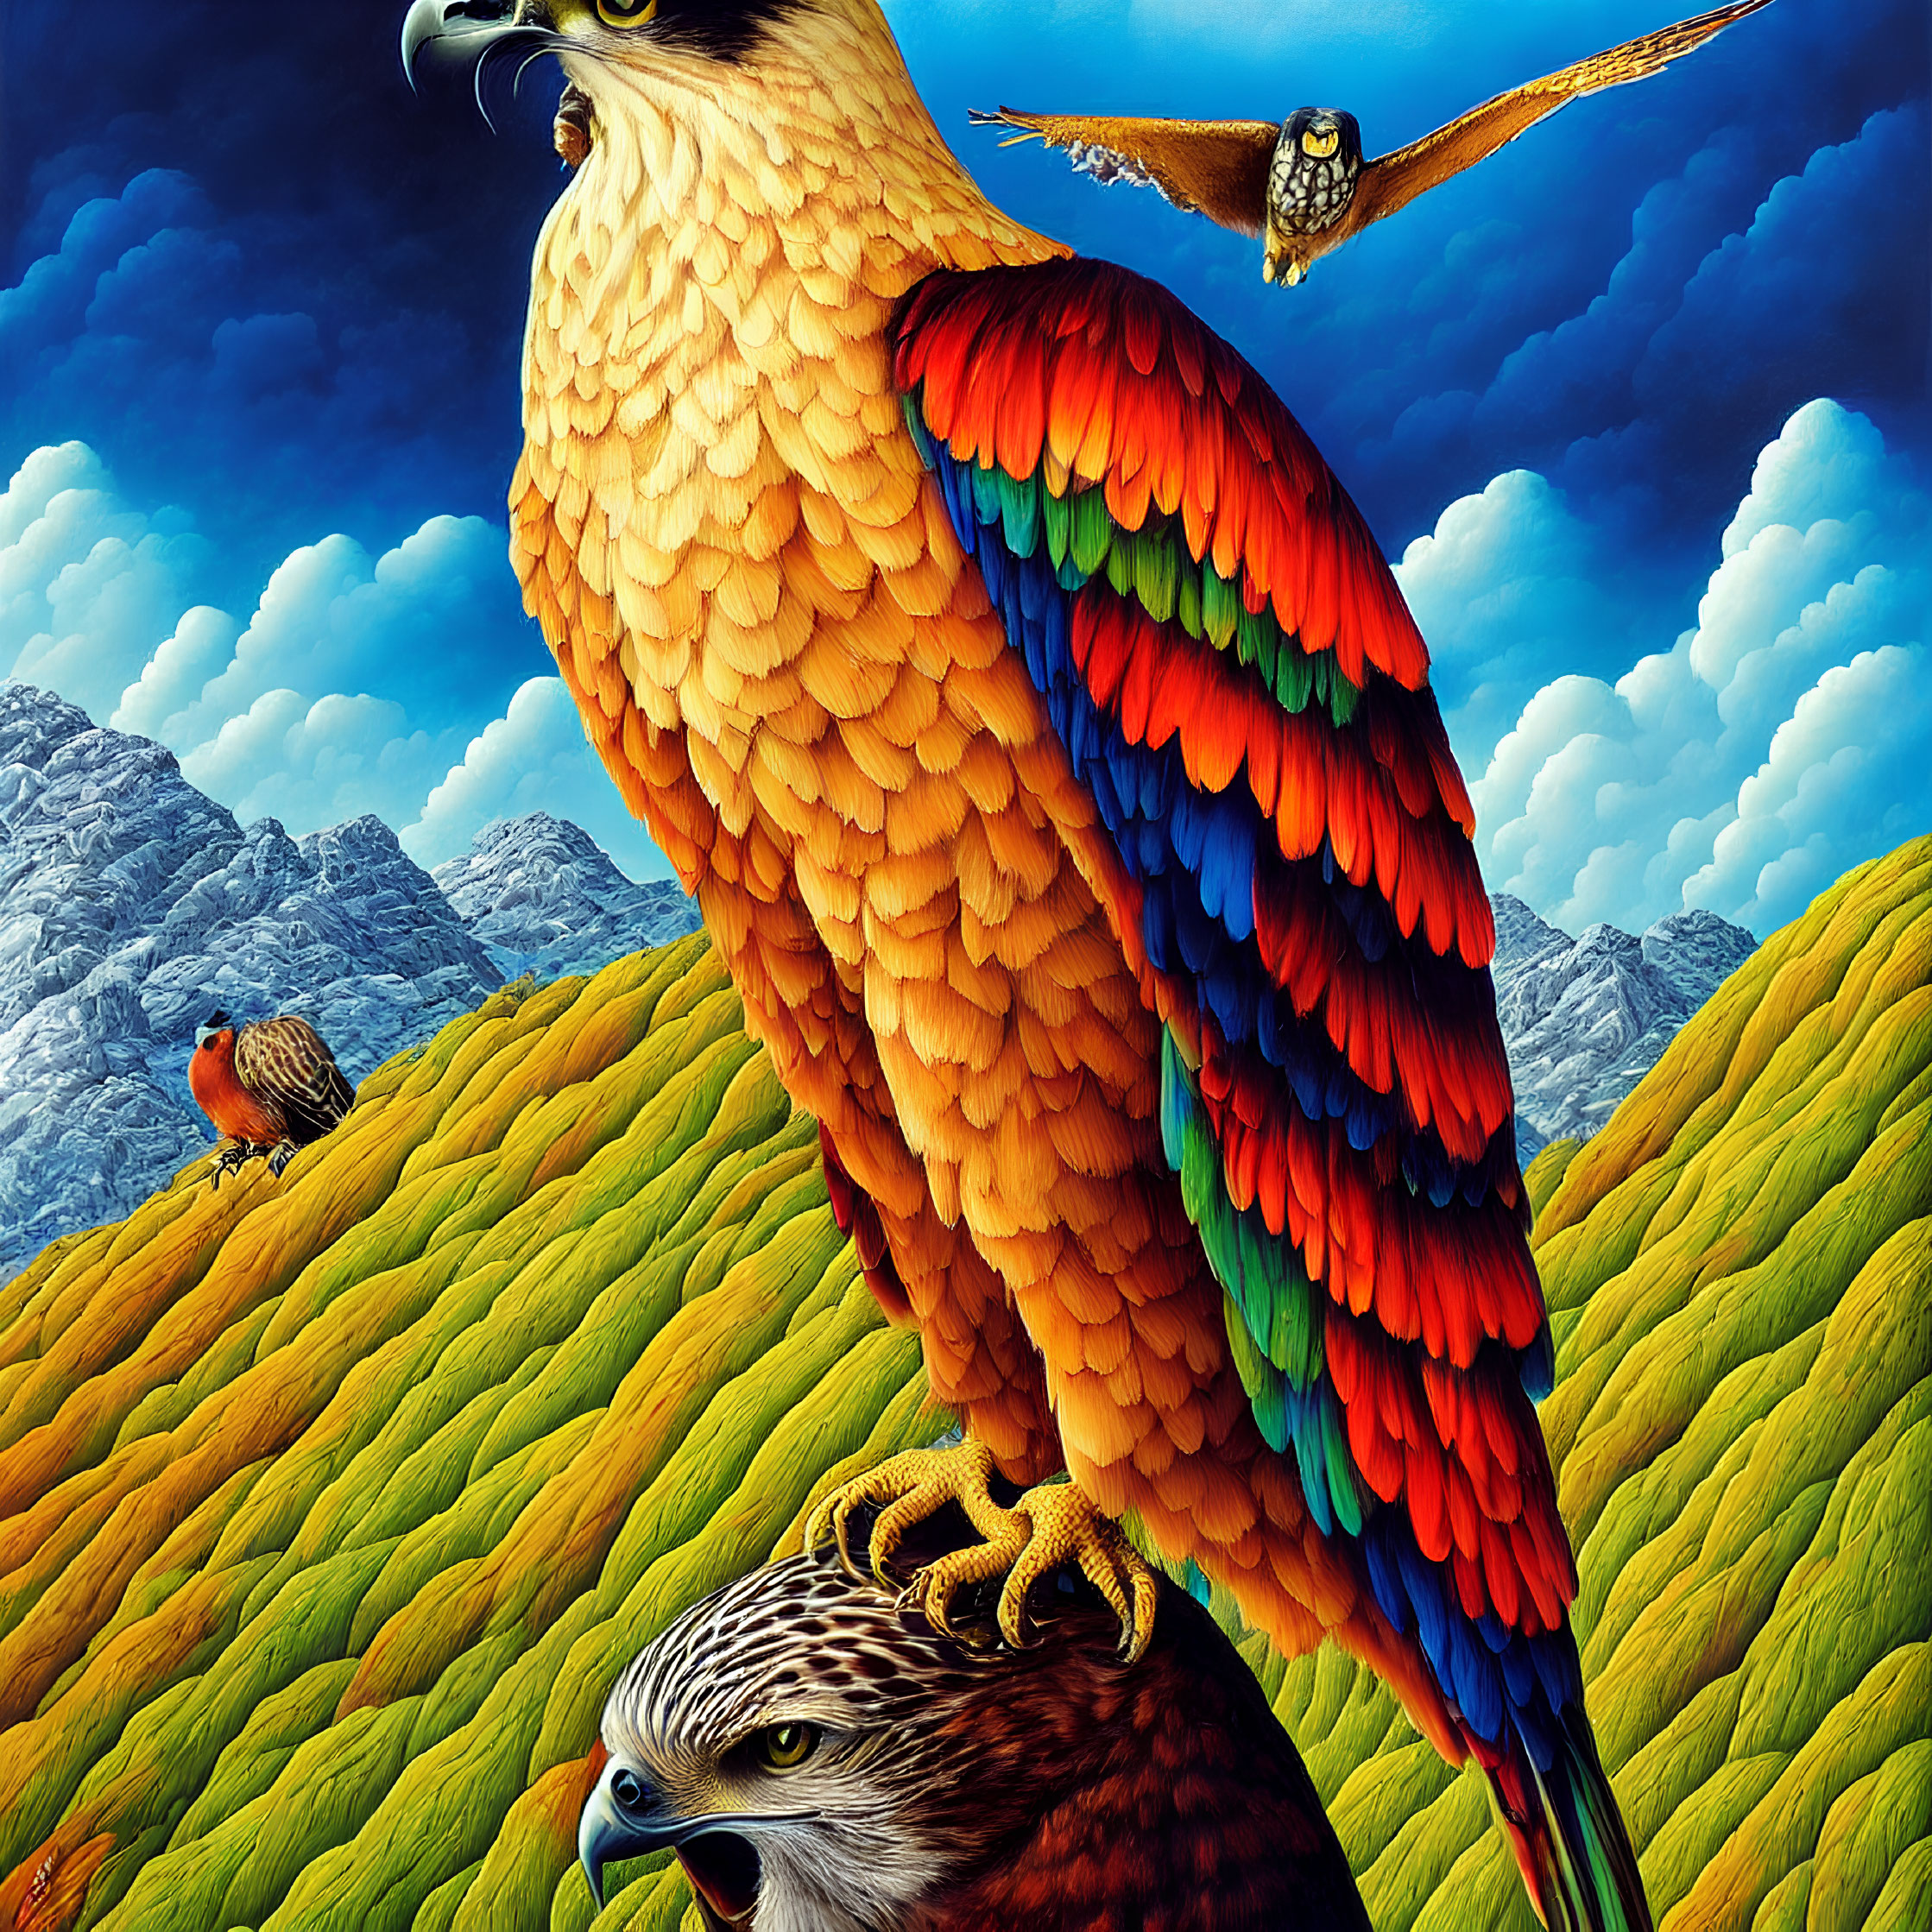 Colorful eagle with rainbow feathers in mountain landscape